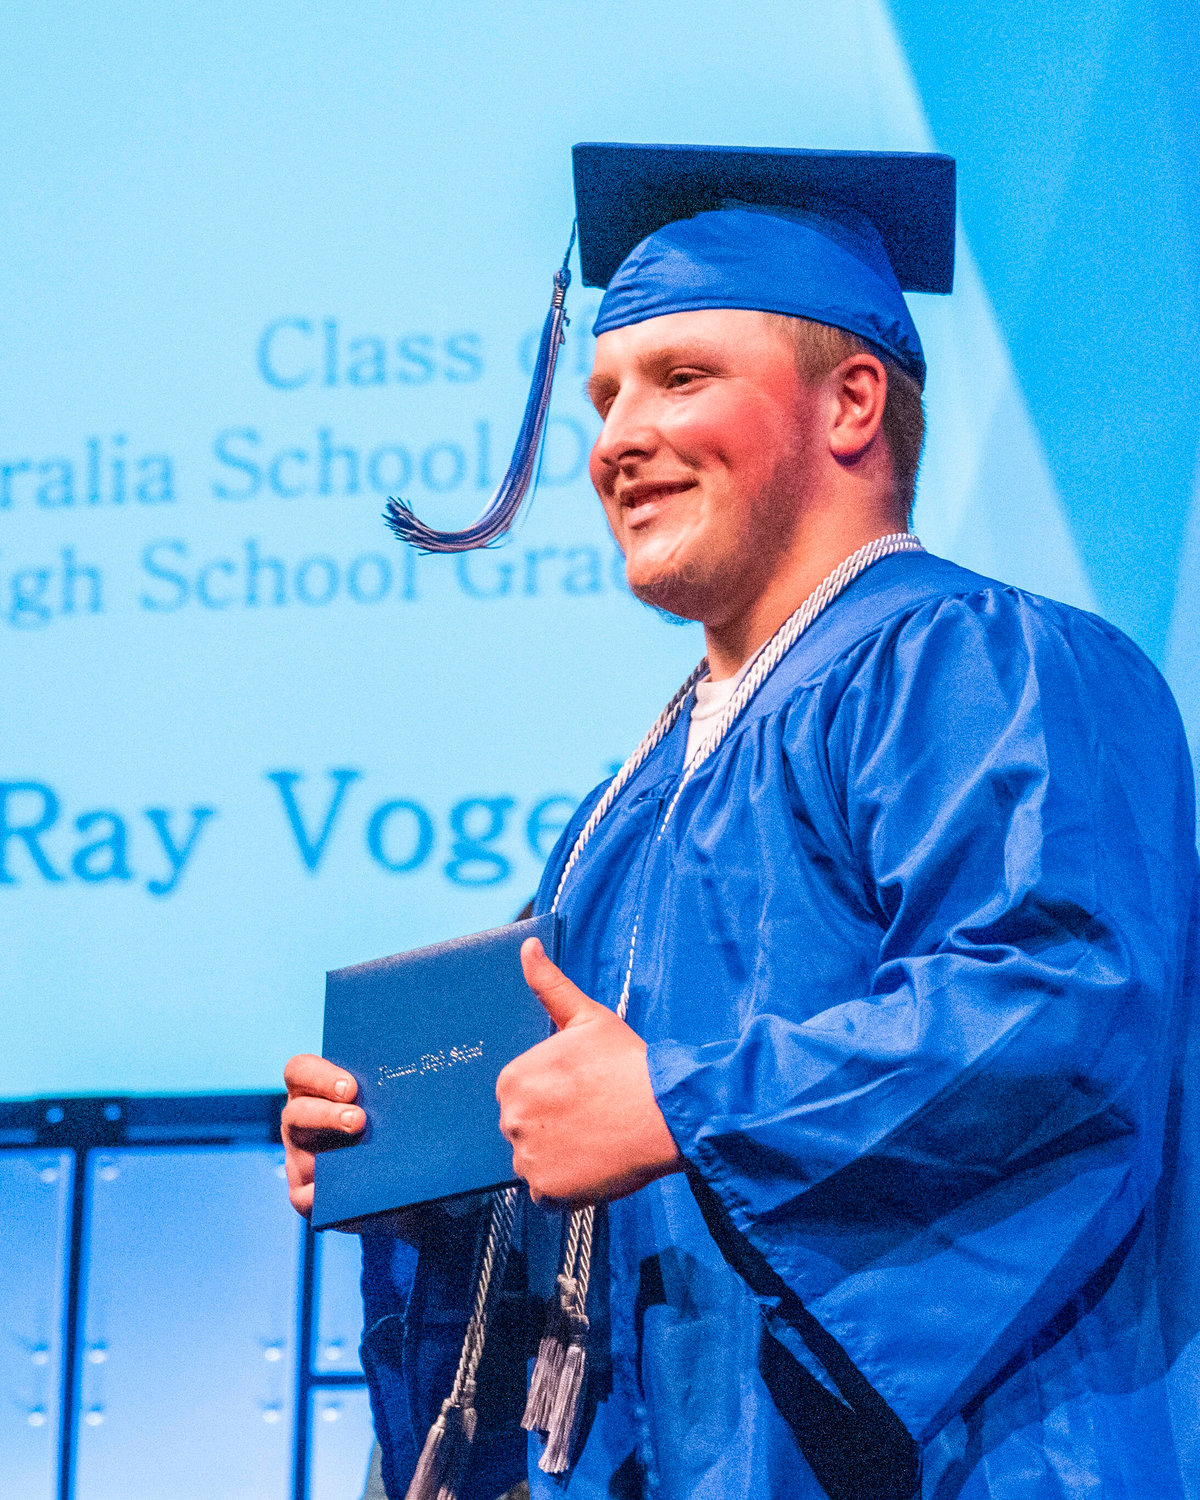 Sawyer Ray Vogel smiles and gives thumbs up while holding his diploma during the Futurus High School graduation ceremony at the Centralia Community Church of God on Tuesday.